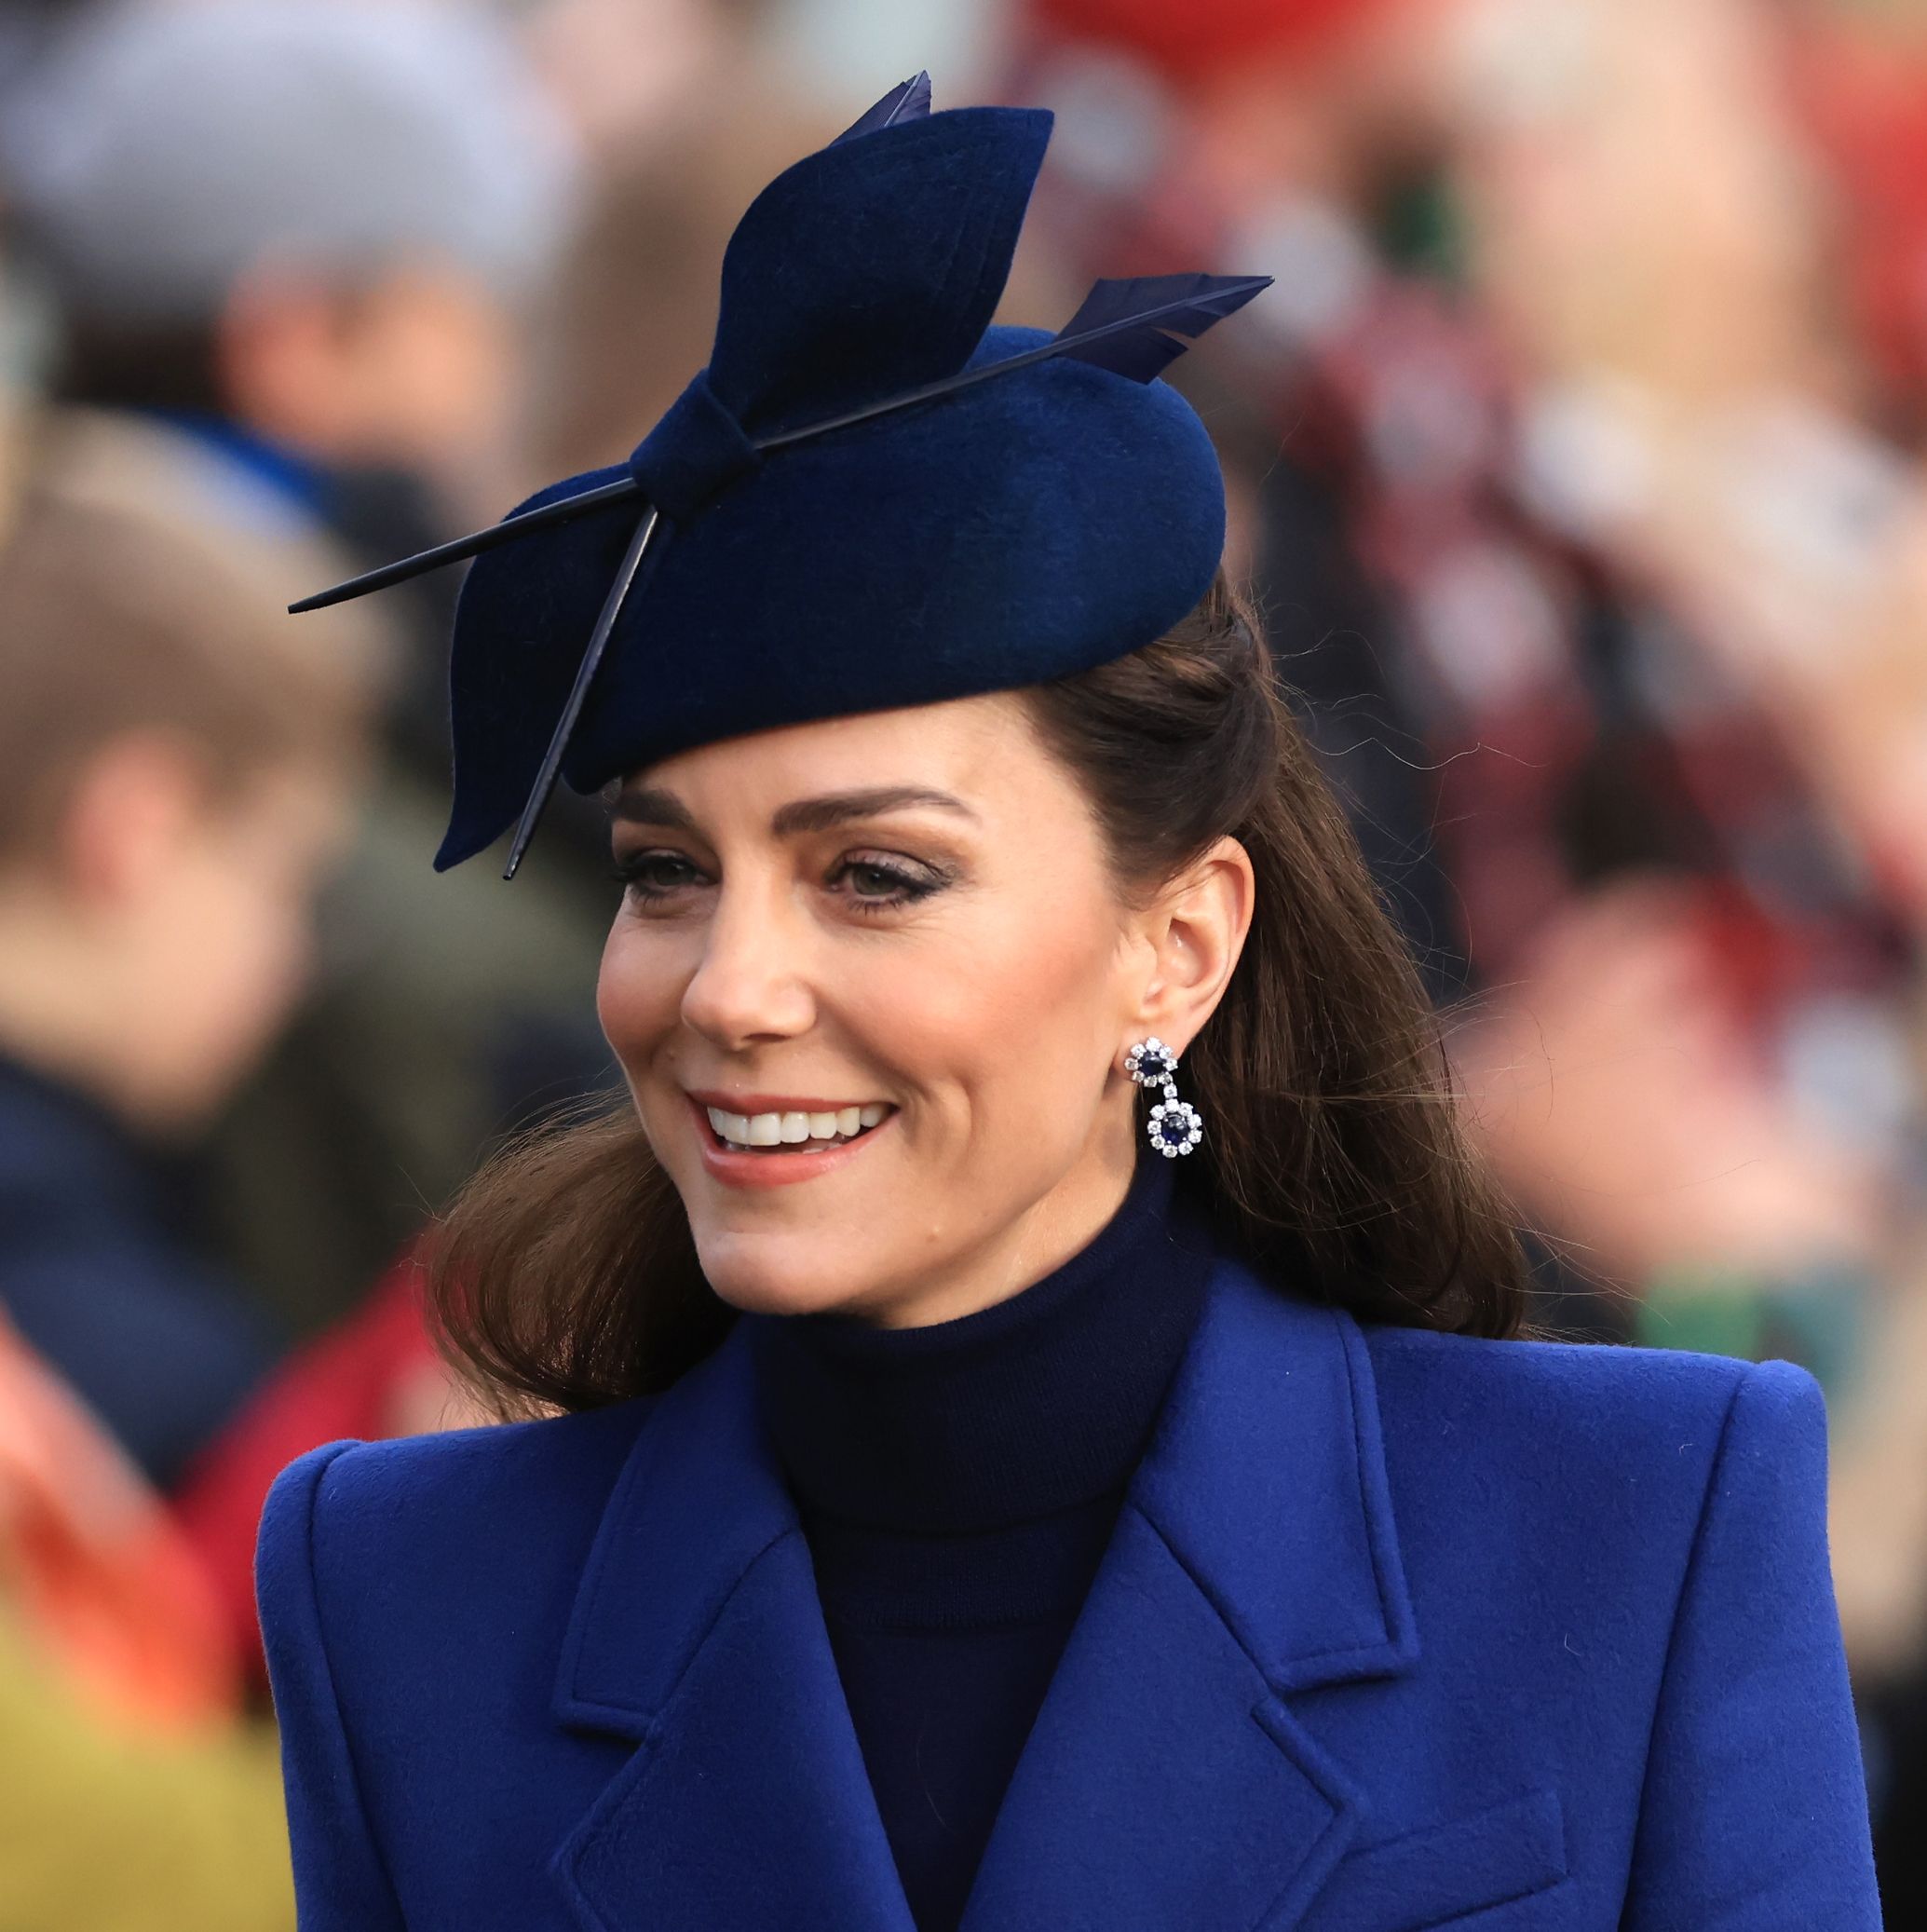 The Princess of Wales did a blue monochrome look this year at Sandringham.